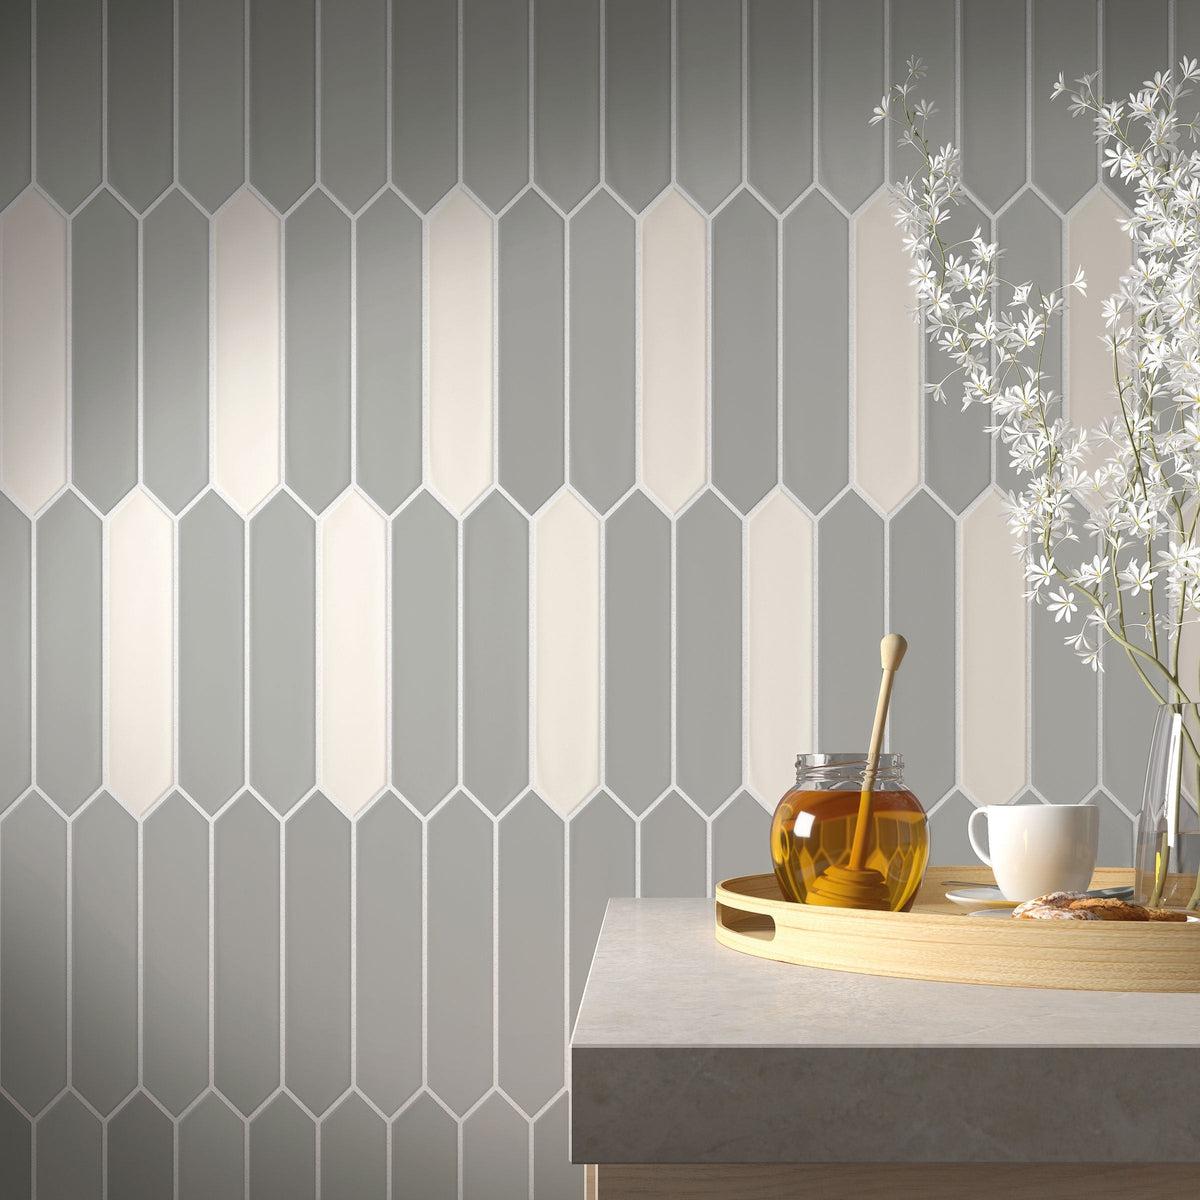 Gray and white ceramic picket tile wall